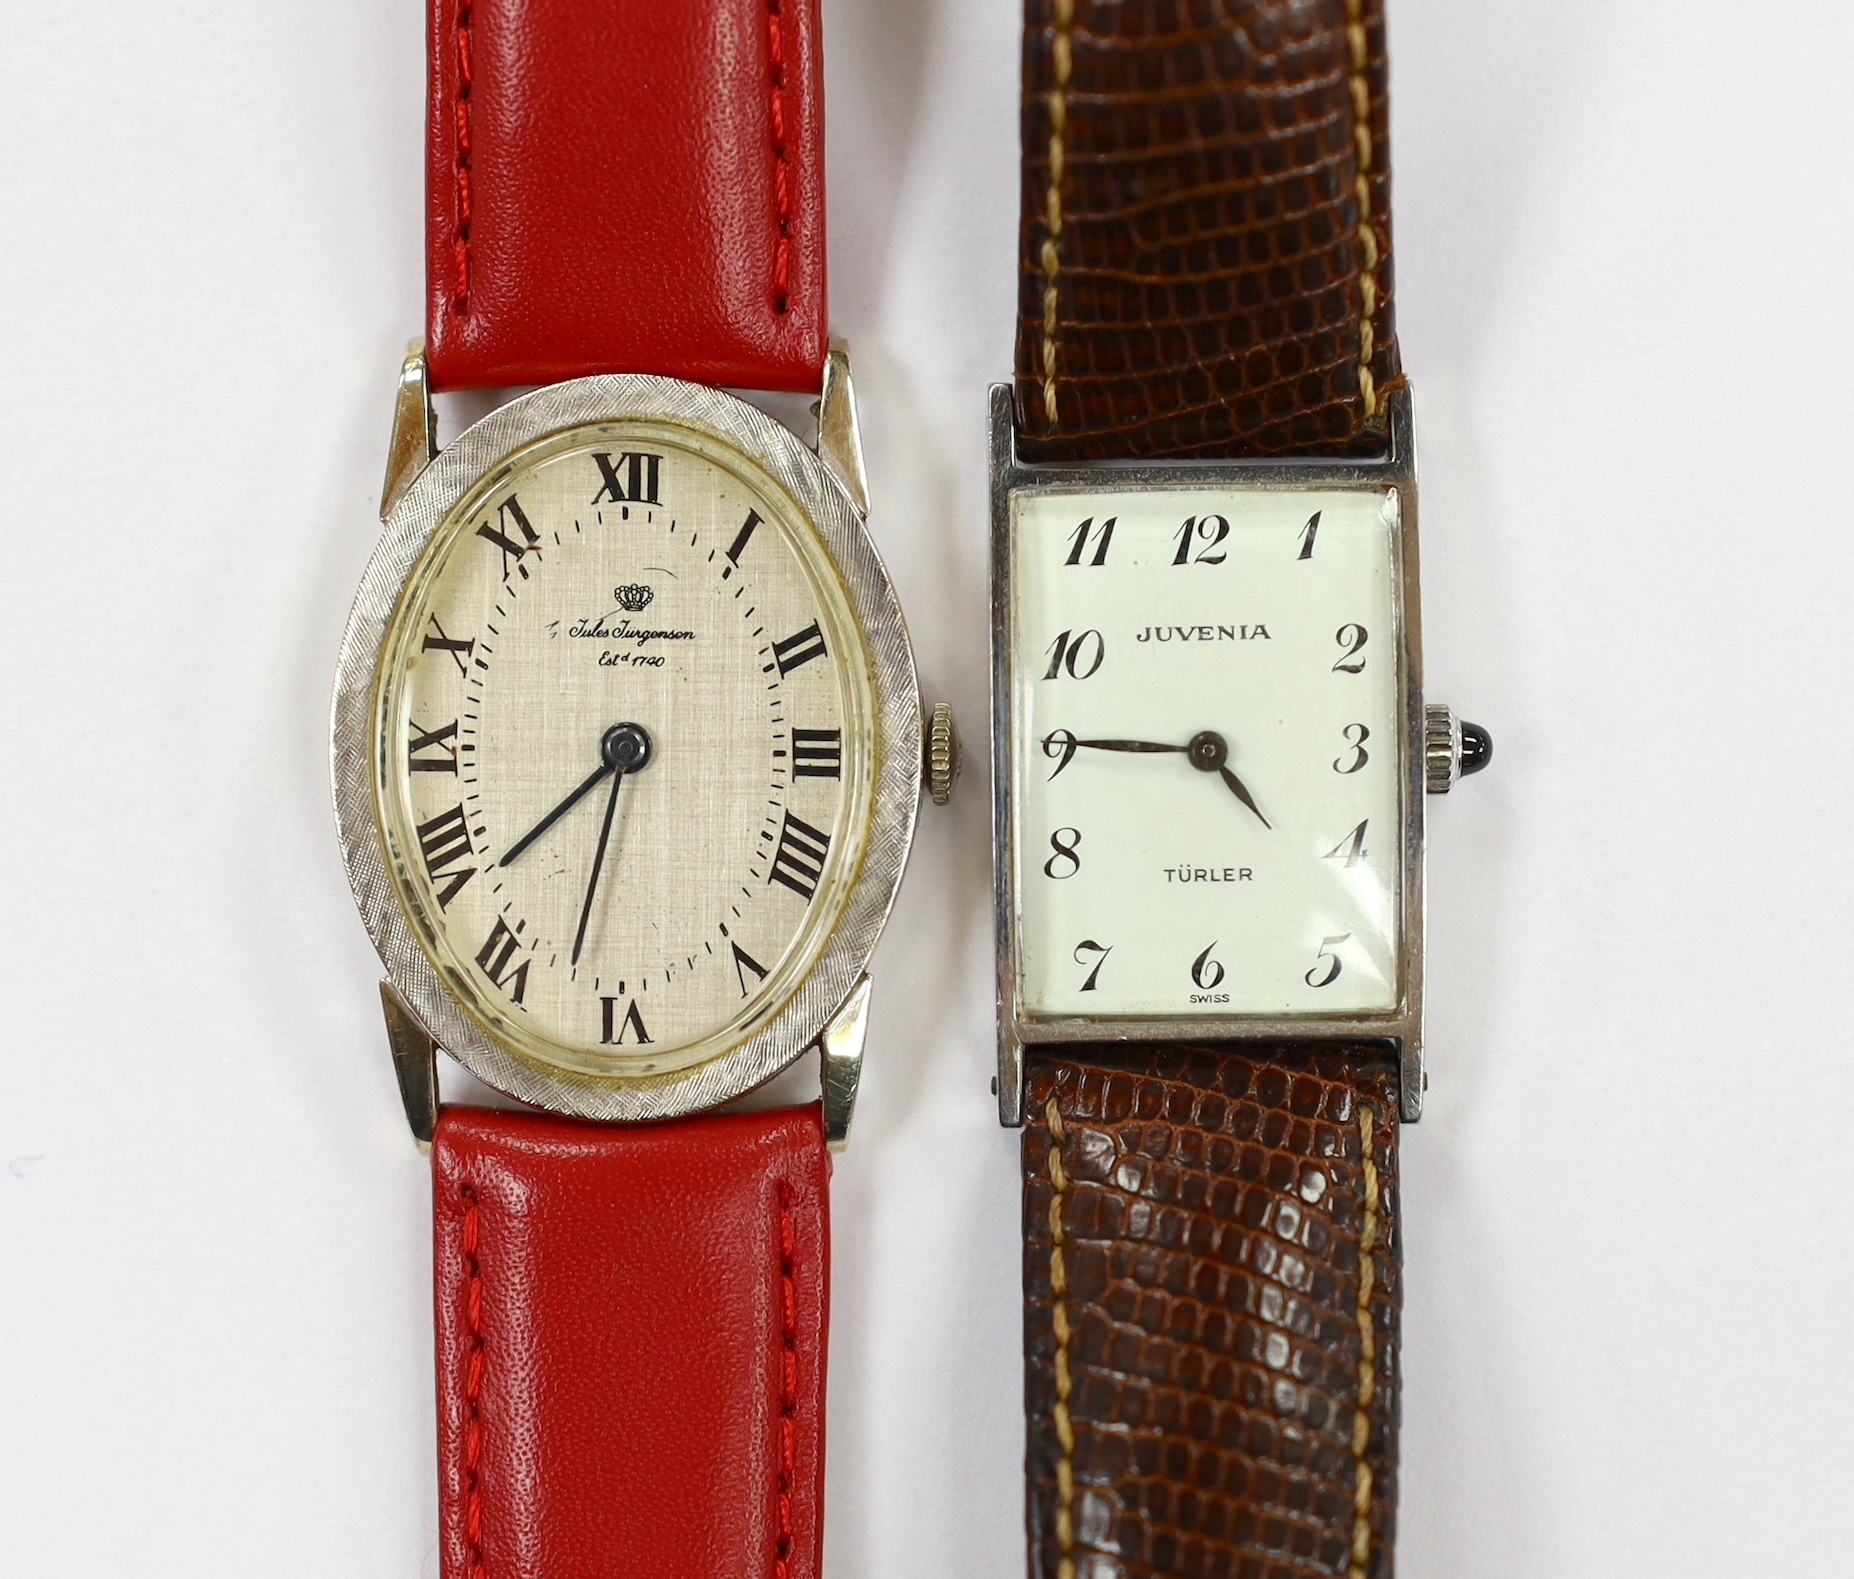 A 14k white metal Jules Jurgensen oval manual wind dress wrist watch, on an associated red leather strap, together with a lady's steel Juvenia manual wind wrist watch.